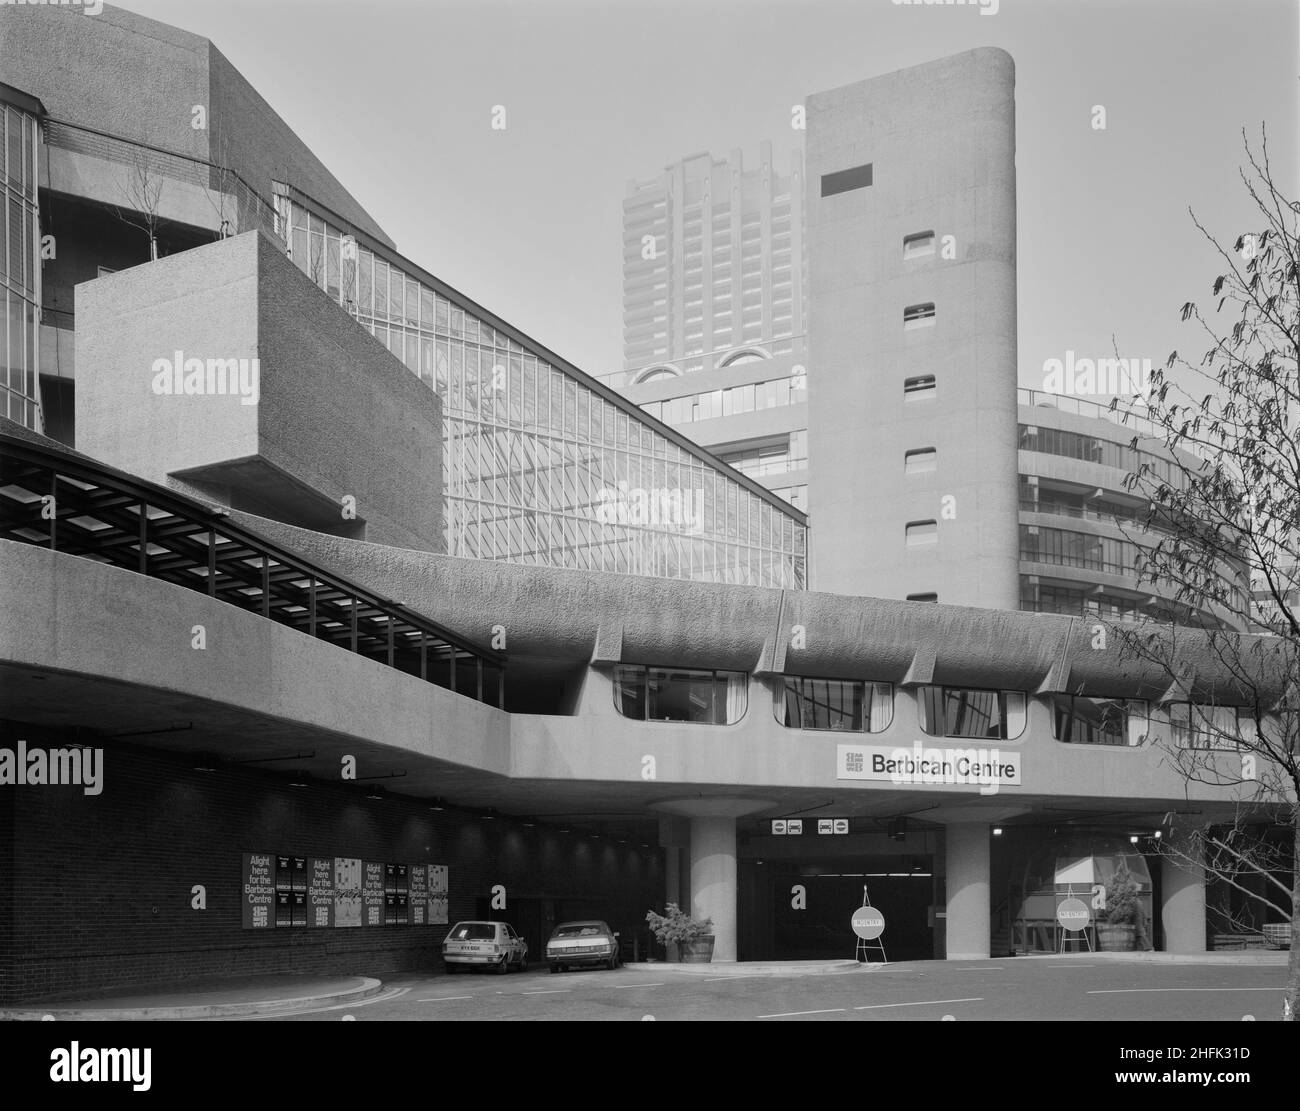 Barbican Centre, Silk Street, City of London, 01/03/1982. An exterior view of the main entrance to the Barbican Arts Centre. John Laing &amp; Son Ltd were responsible for the construction of Phase V of the Barbican development, which included the Barbican Arts Centre and the Guildhall School of Music and Drama. The Barbican Centre is a huge performing arts centre which houses a library, theatre, concert hall, cinemas, conservatory, seminar rooms and more. On Wednesday 3rd March 1982, the Barbican Centre was ceremonially opened by Queen Elizabeth II, who unveiled a commemorative plaque to mark Stock Photo